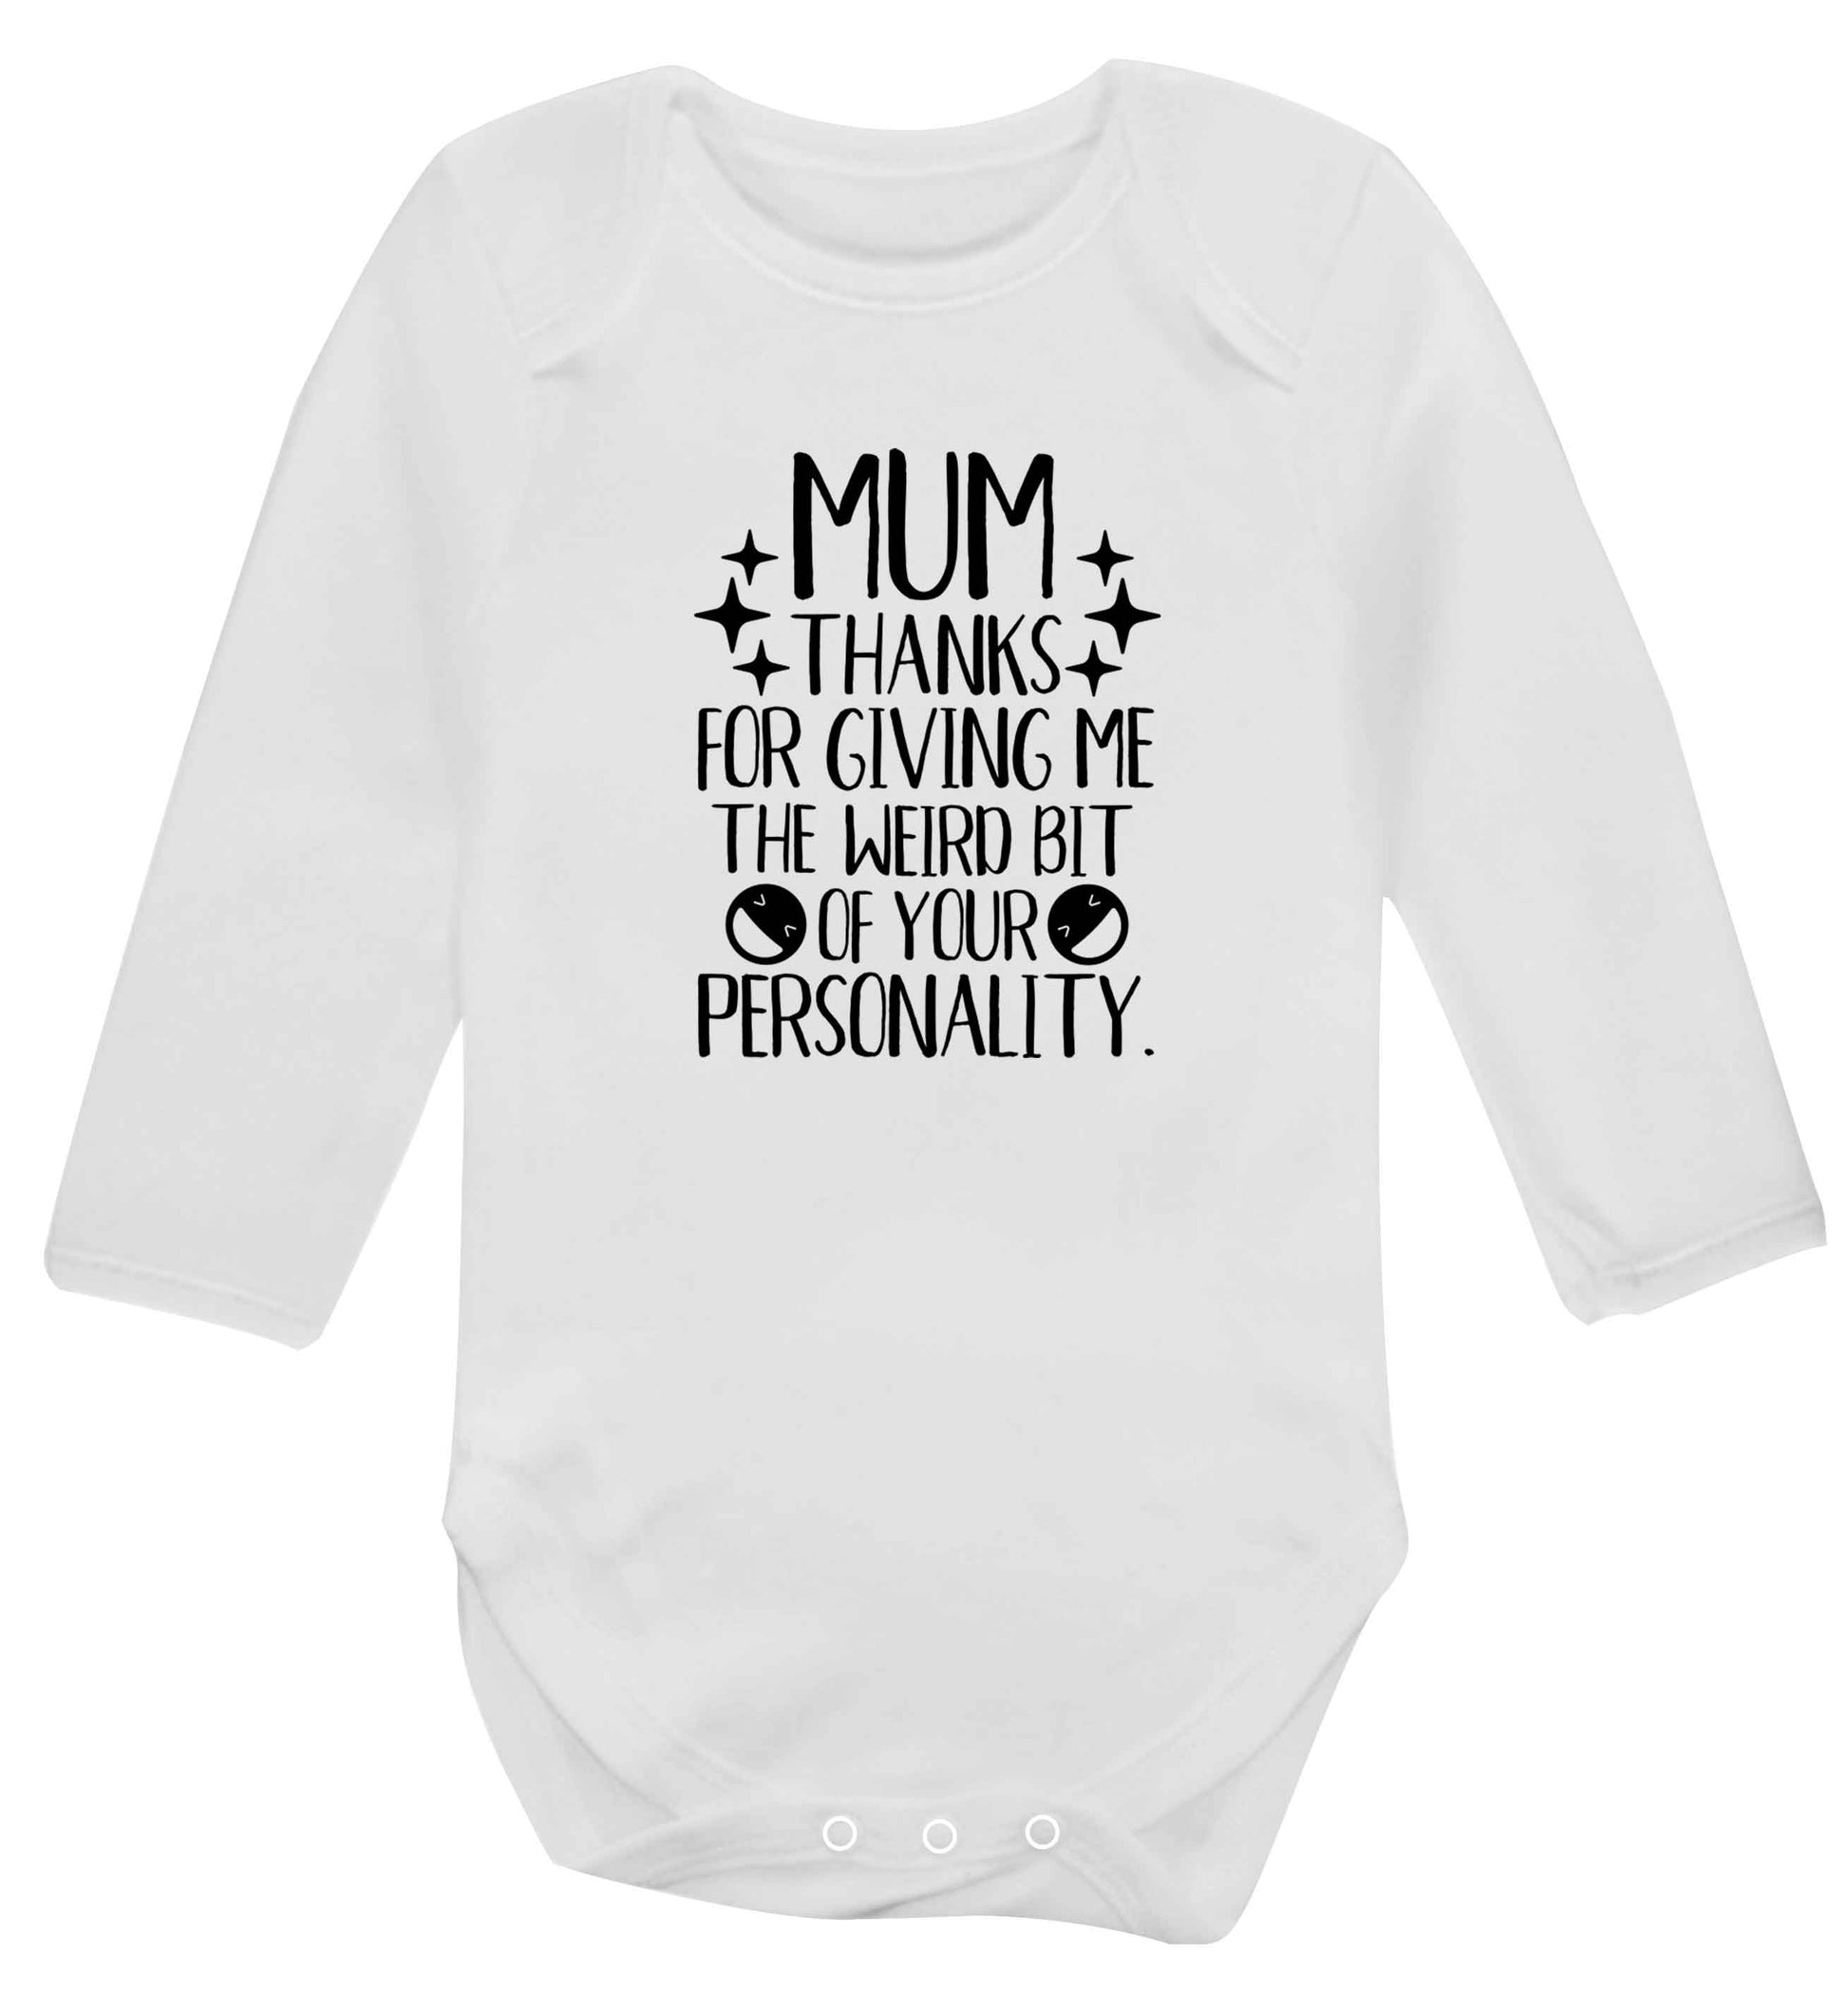 Mum thanks for giving me the weird bit of your personality baby vest long sleeved white 6-12 months